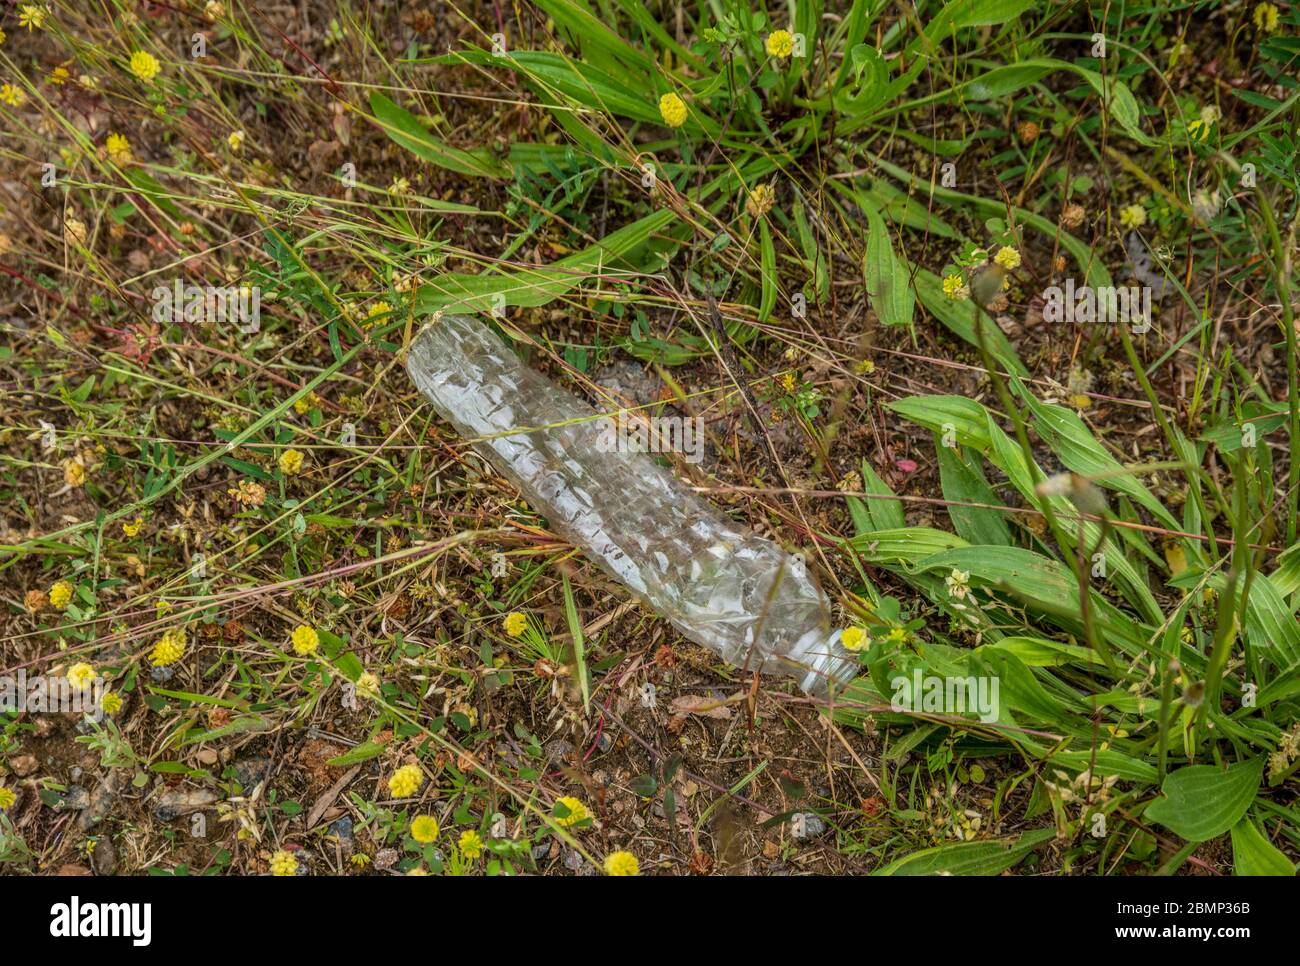 A empty used discarded recyclable plastic bottle dumped along the roadside crumpled among the weeds on the ground polluting the earth Stock Photo